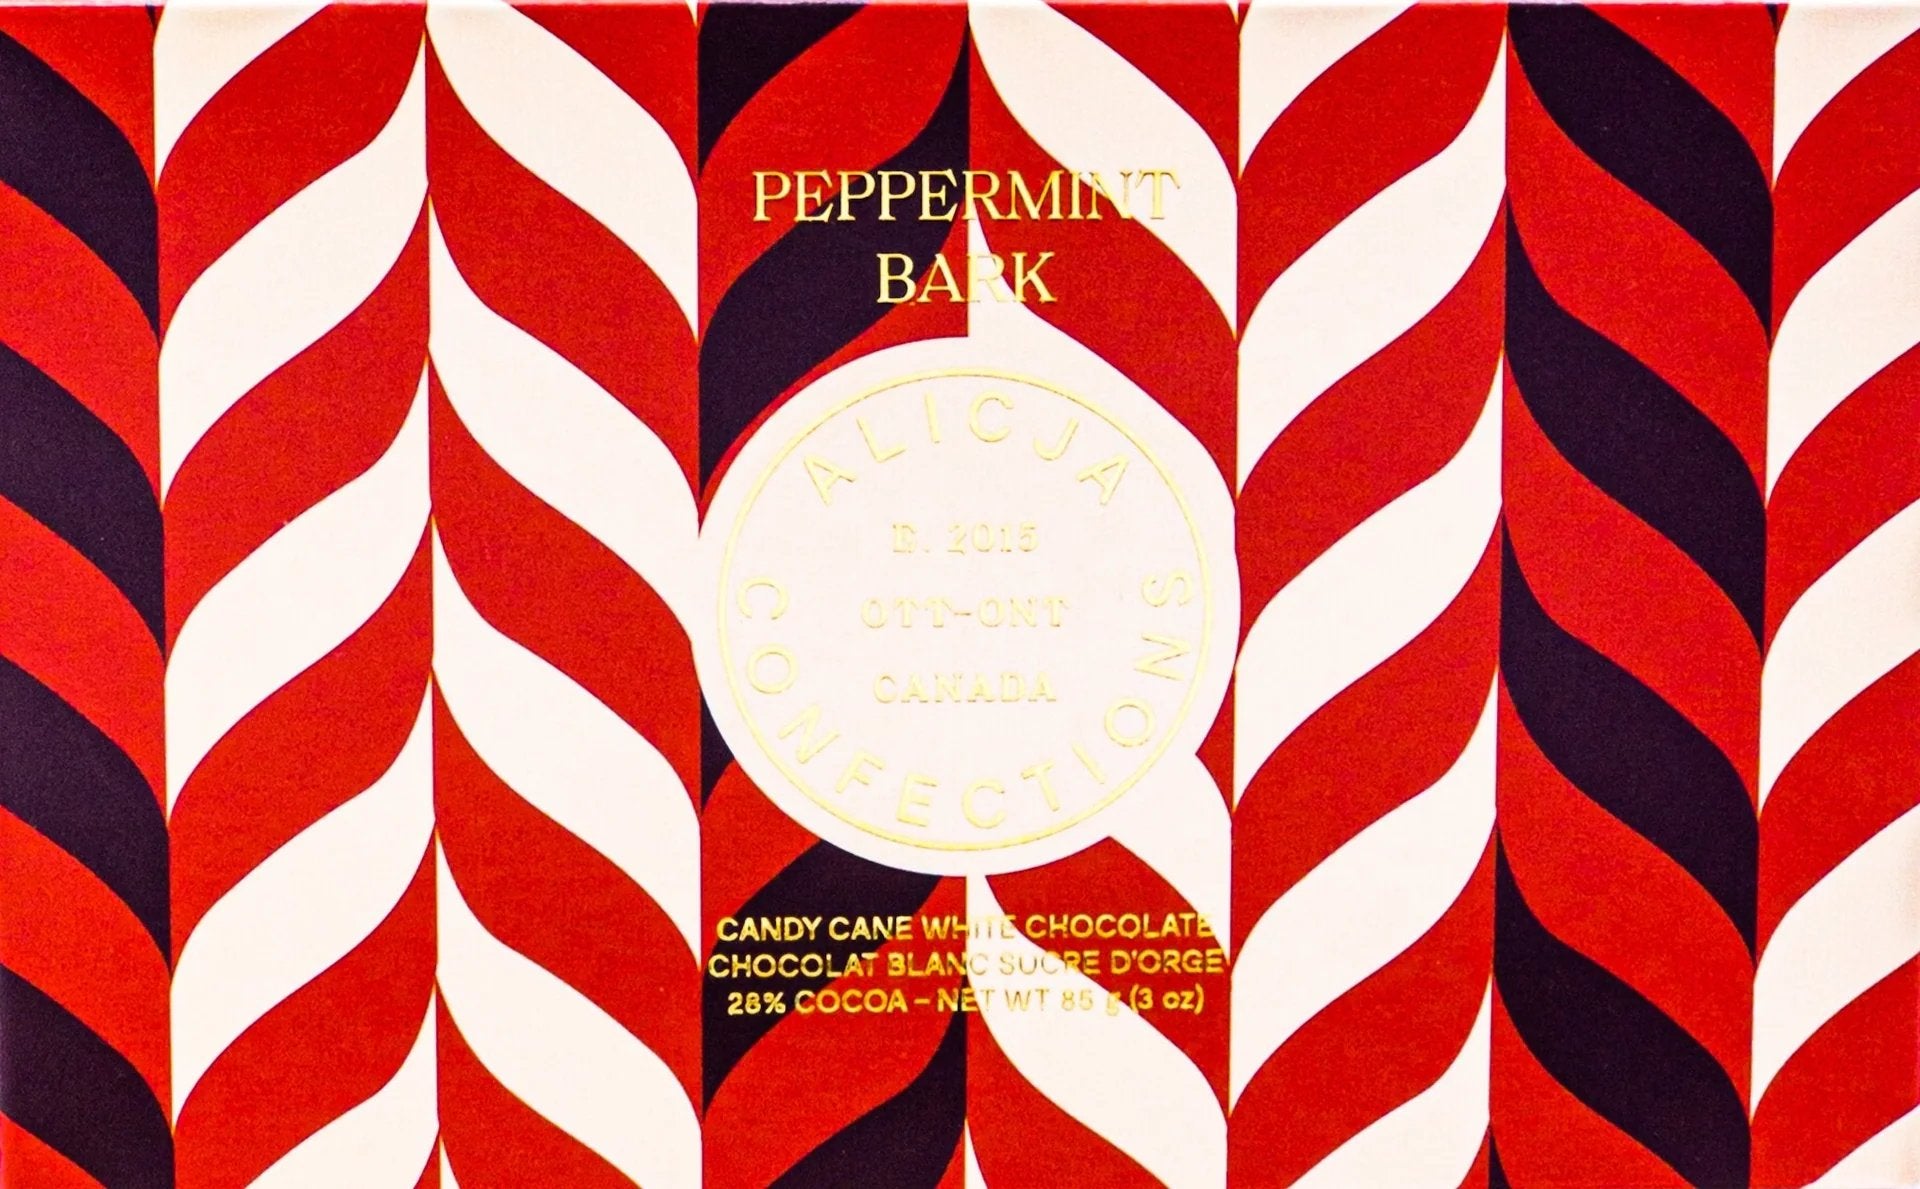 Peppermint Bark Candy Cane White Chocolate by Alicja Confections